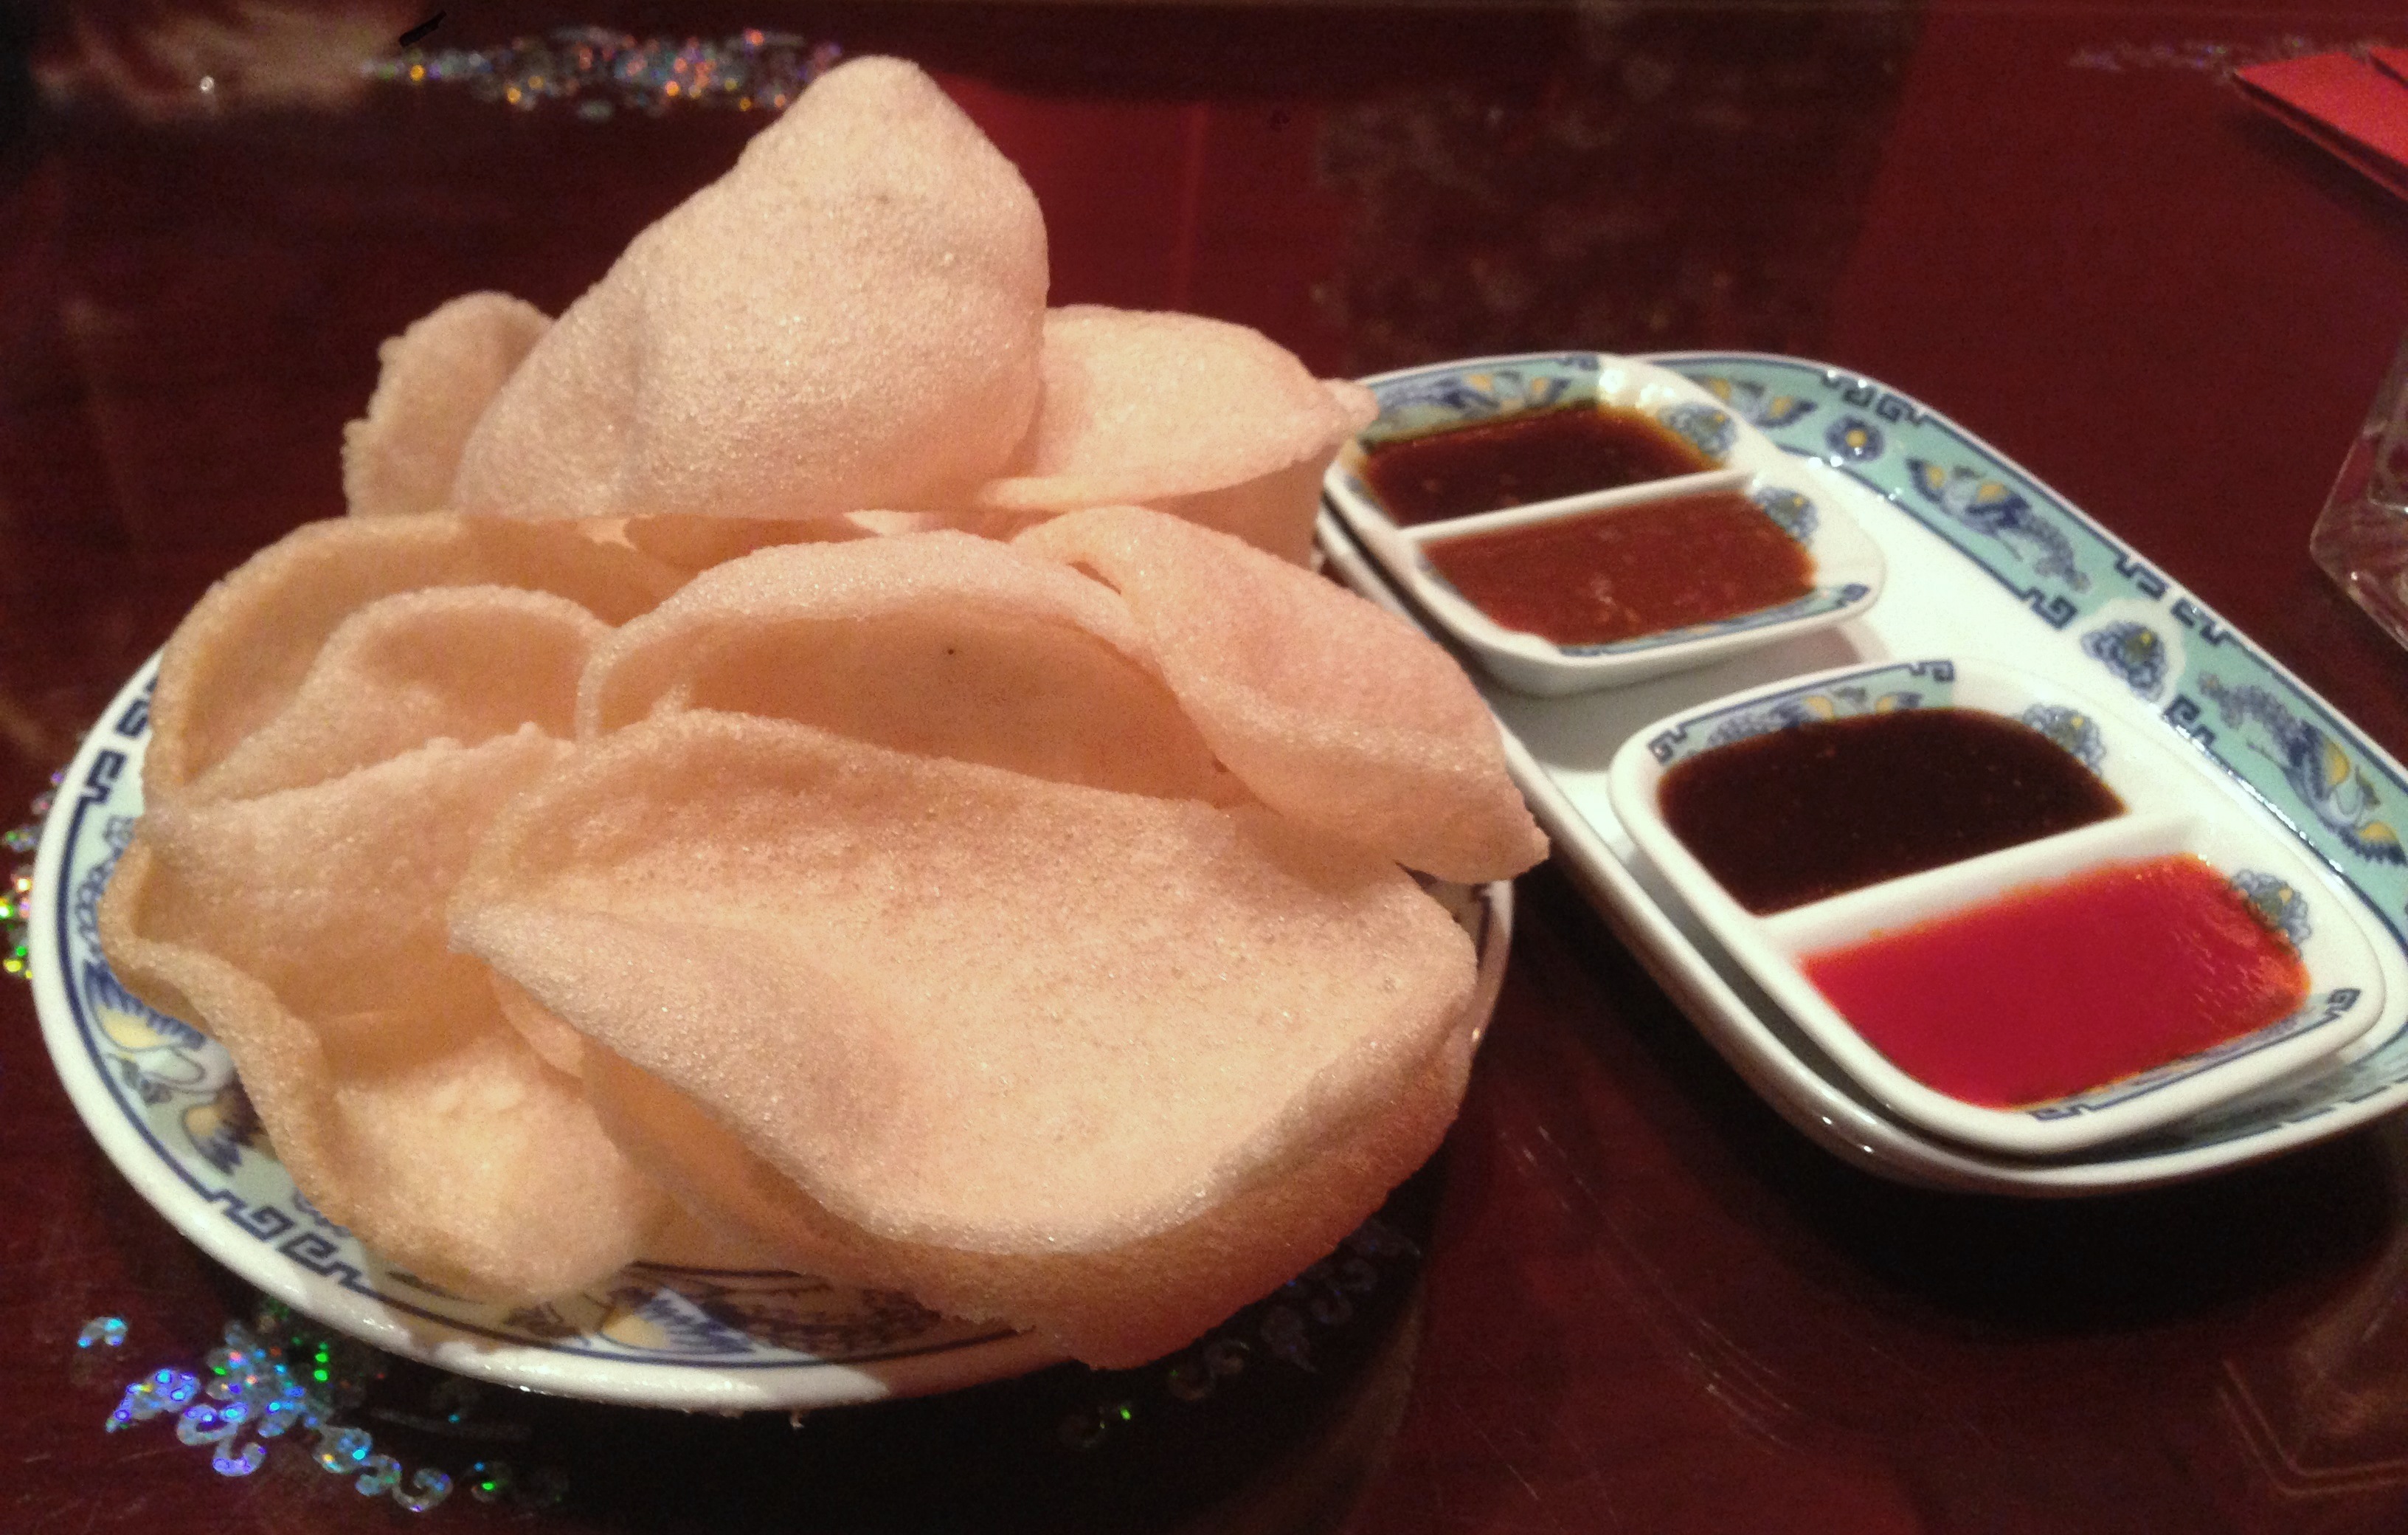 File:Krupuk with sauces.JPG - Wikimedia Commons